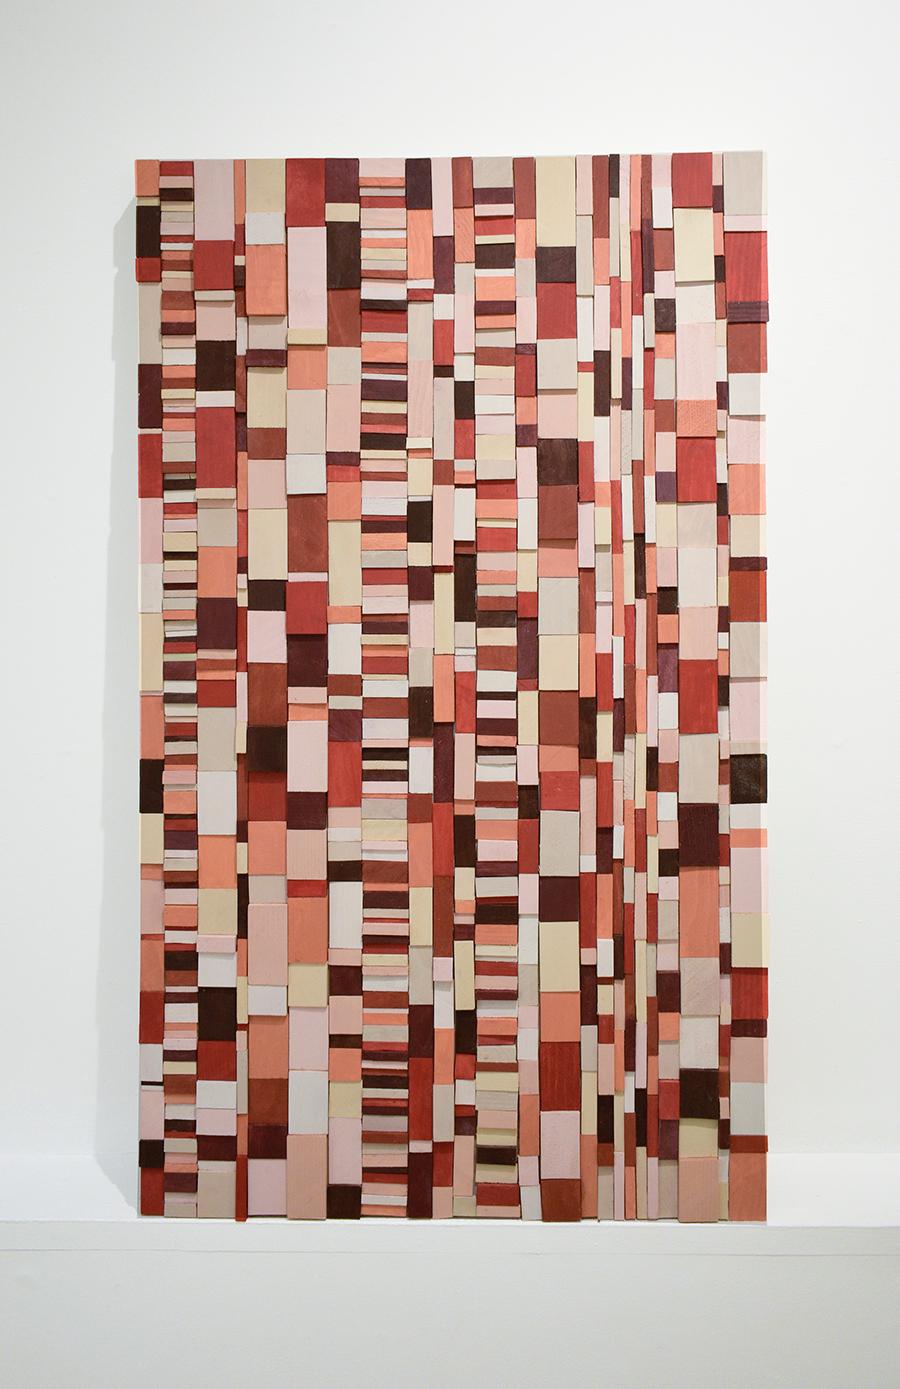 Piquant: Abstract Geometric 3D Wooden Wall Sculpture in Red, Pink, Peach, Maroon - Brown Abstract Sculpture by Stephen Walling